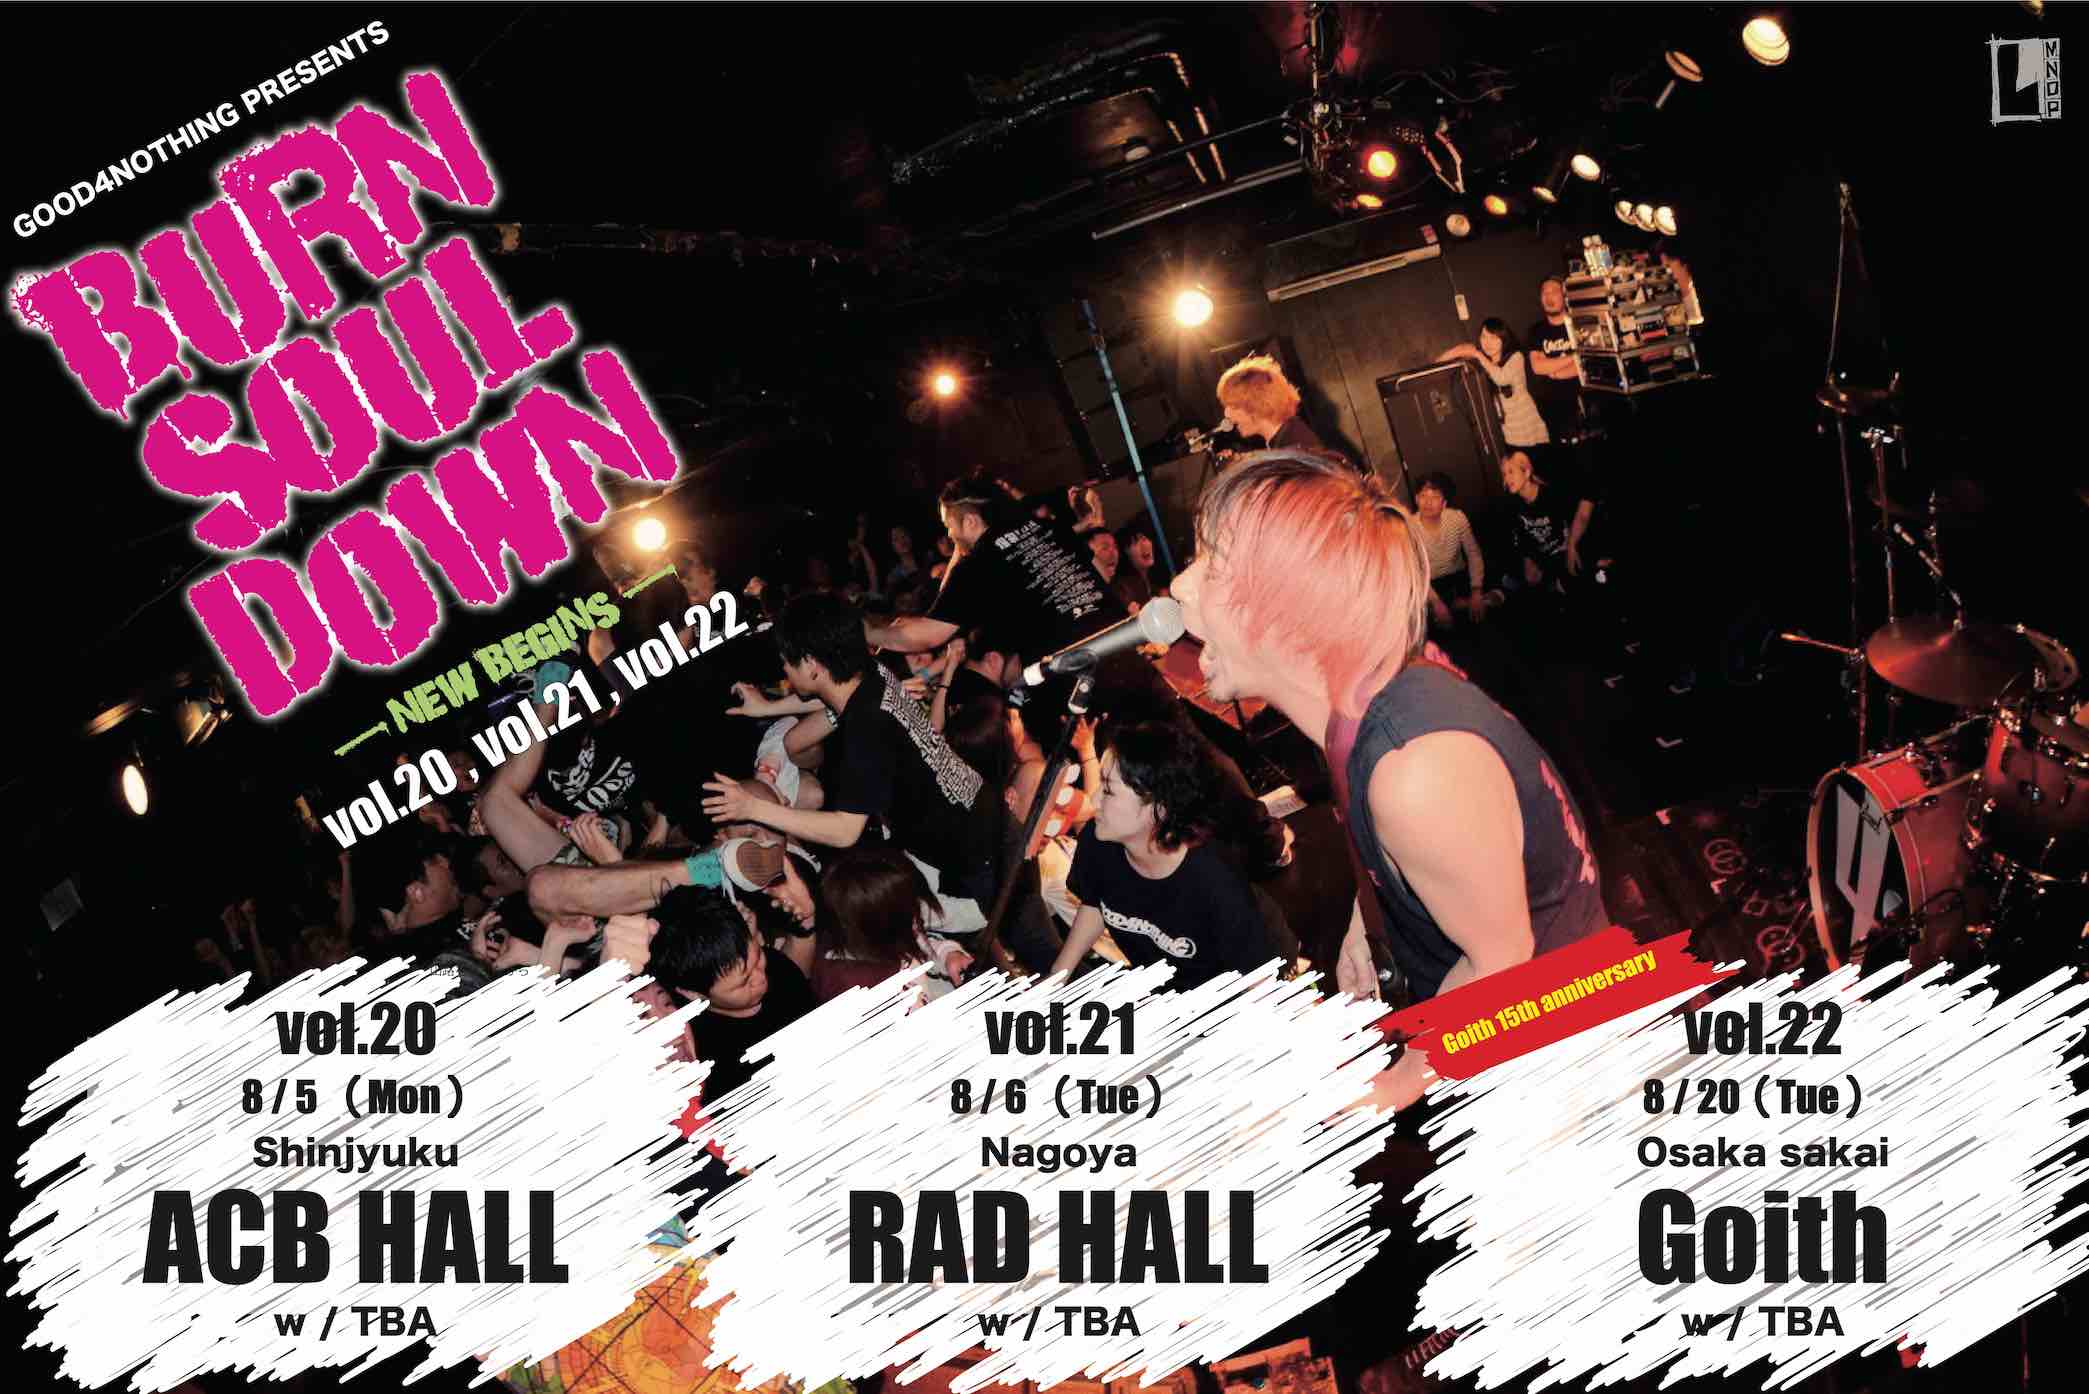 【THANKYOU SOLDOUT！！】GOOD4NOTHING × locofrank「BURN SOUL DOWN vol.22 -NEW BEGINS- Goith 15th anniversary」決行！！